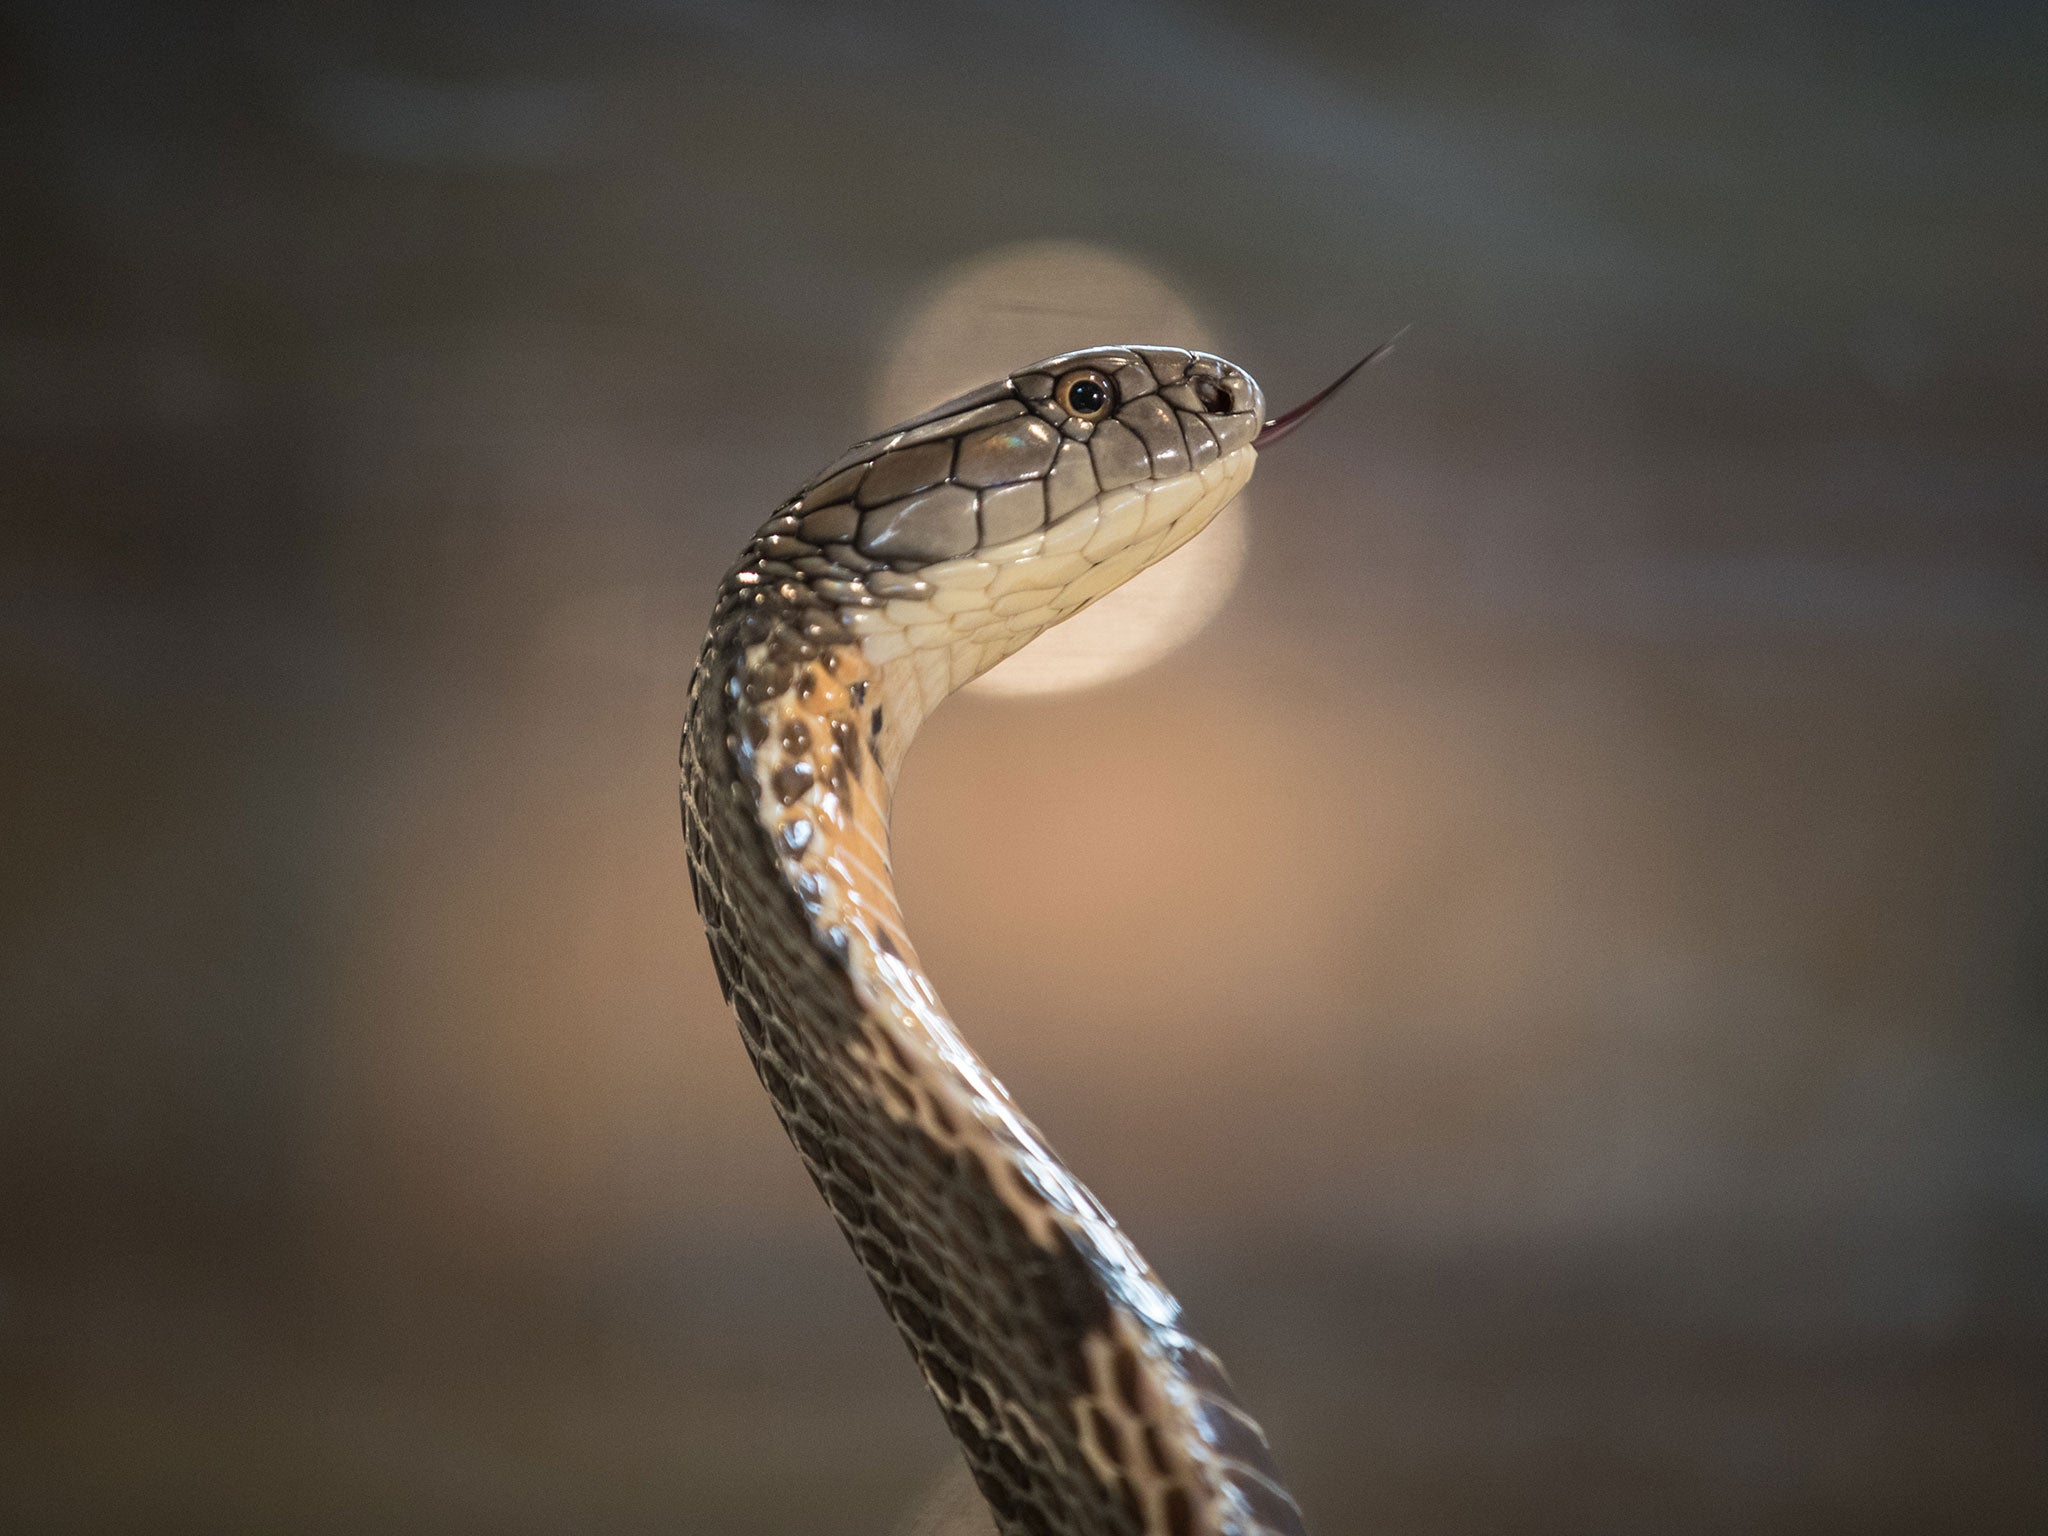 Understanding the role of the gene in keeping the snake's body long may shed new light on spinal cord regeneration